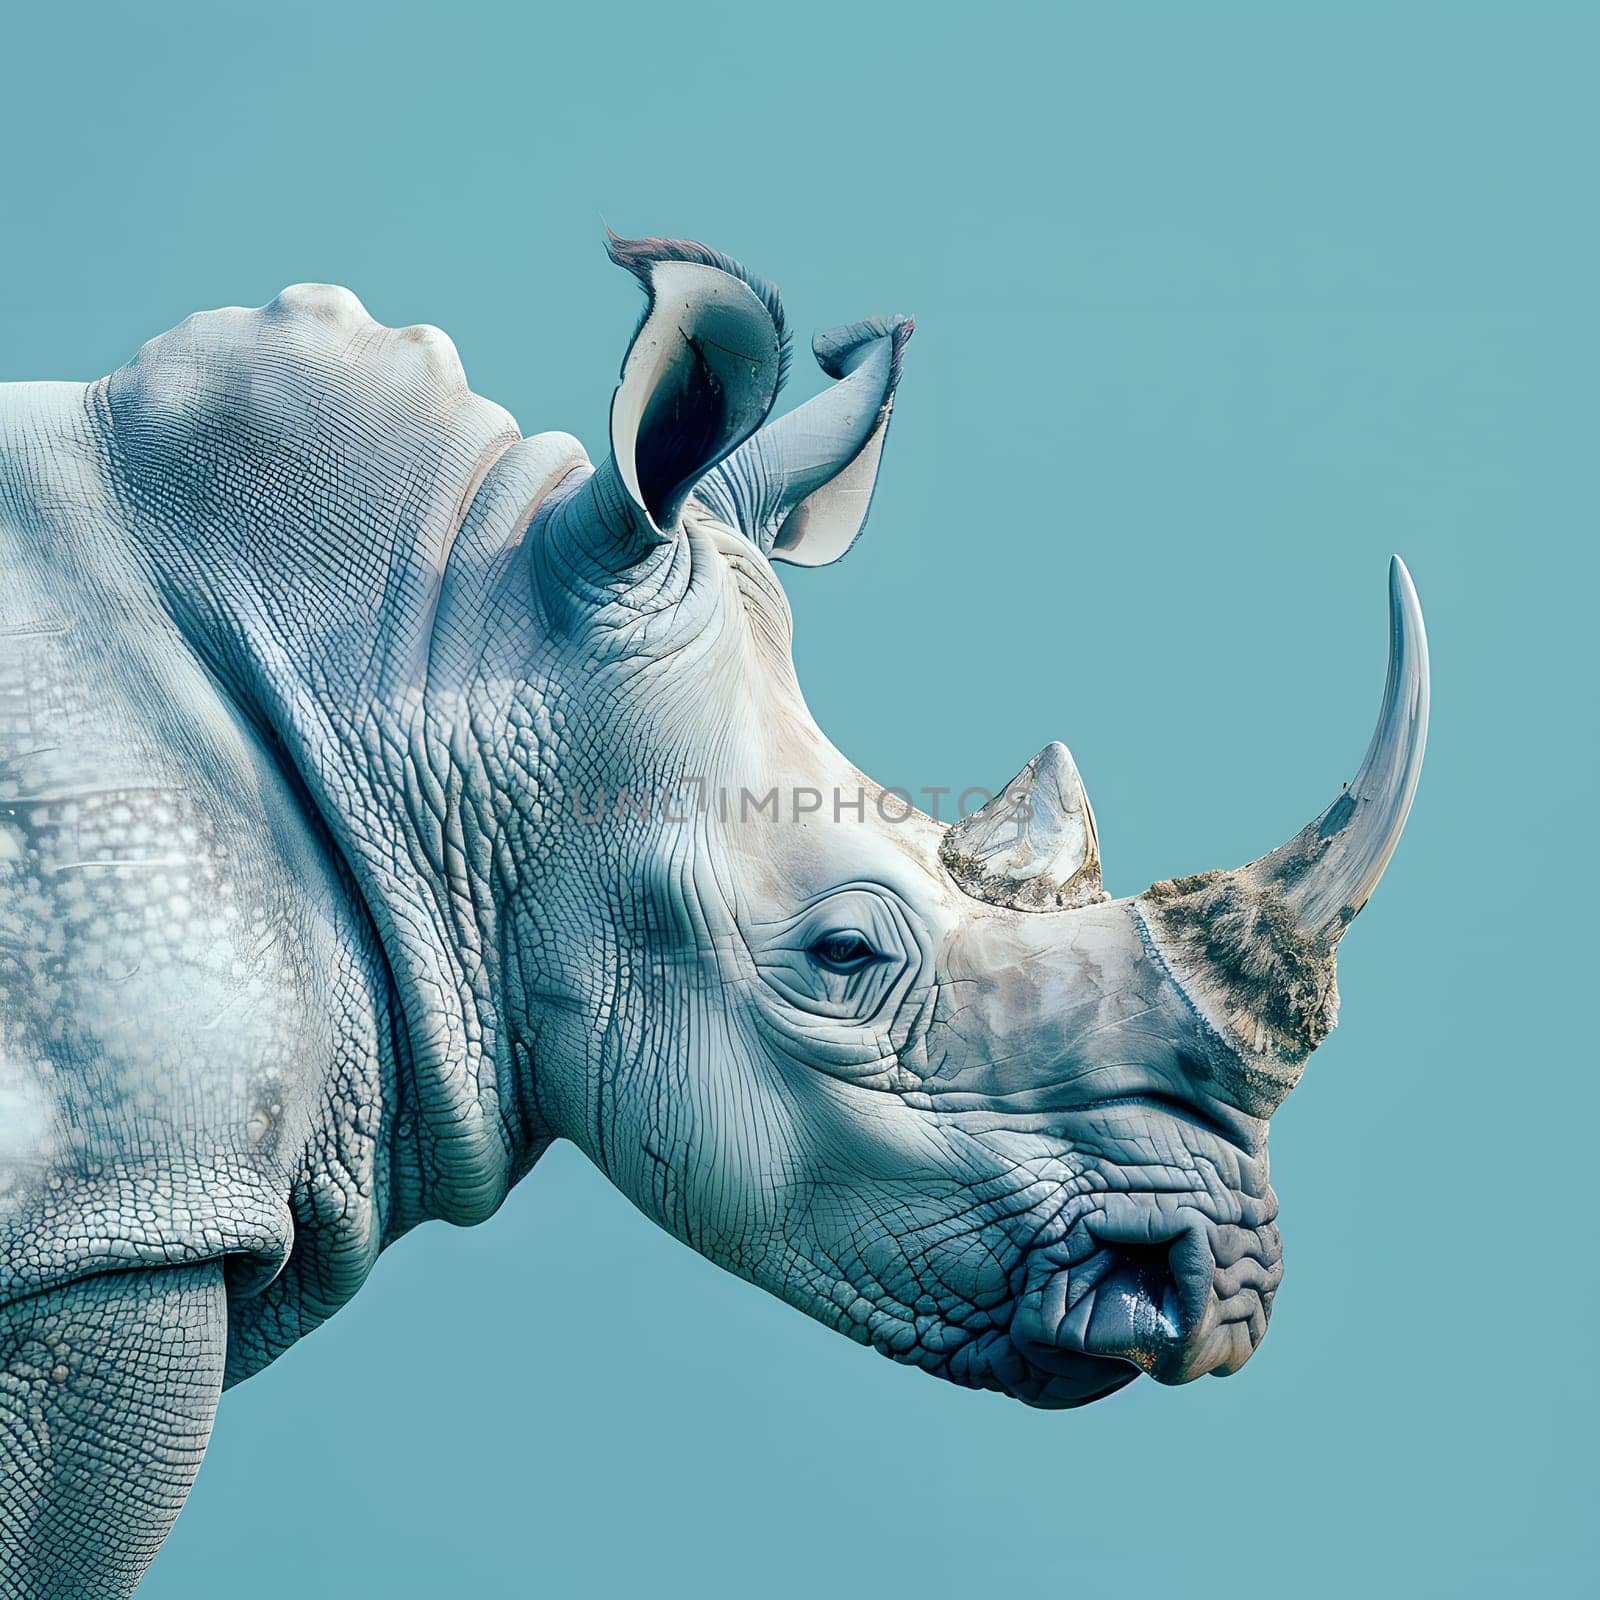 A closeup of a White Rhinoceros head against a clear blue sky, showing its powerful jaw, detailed eye, and majestic sculpturelike gesture